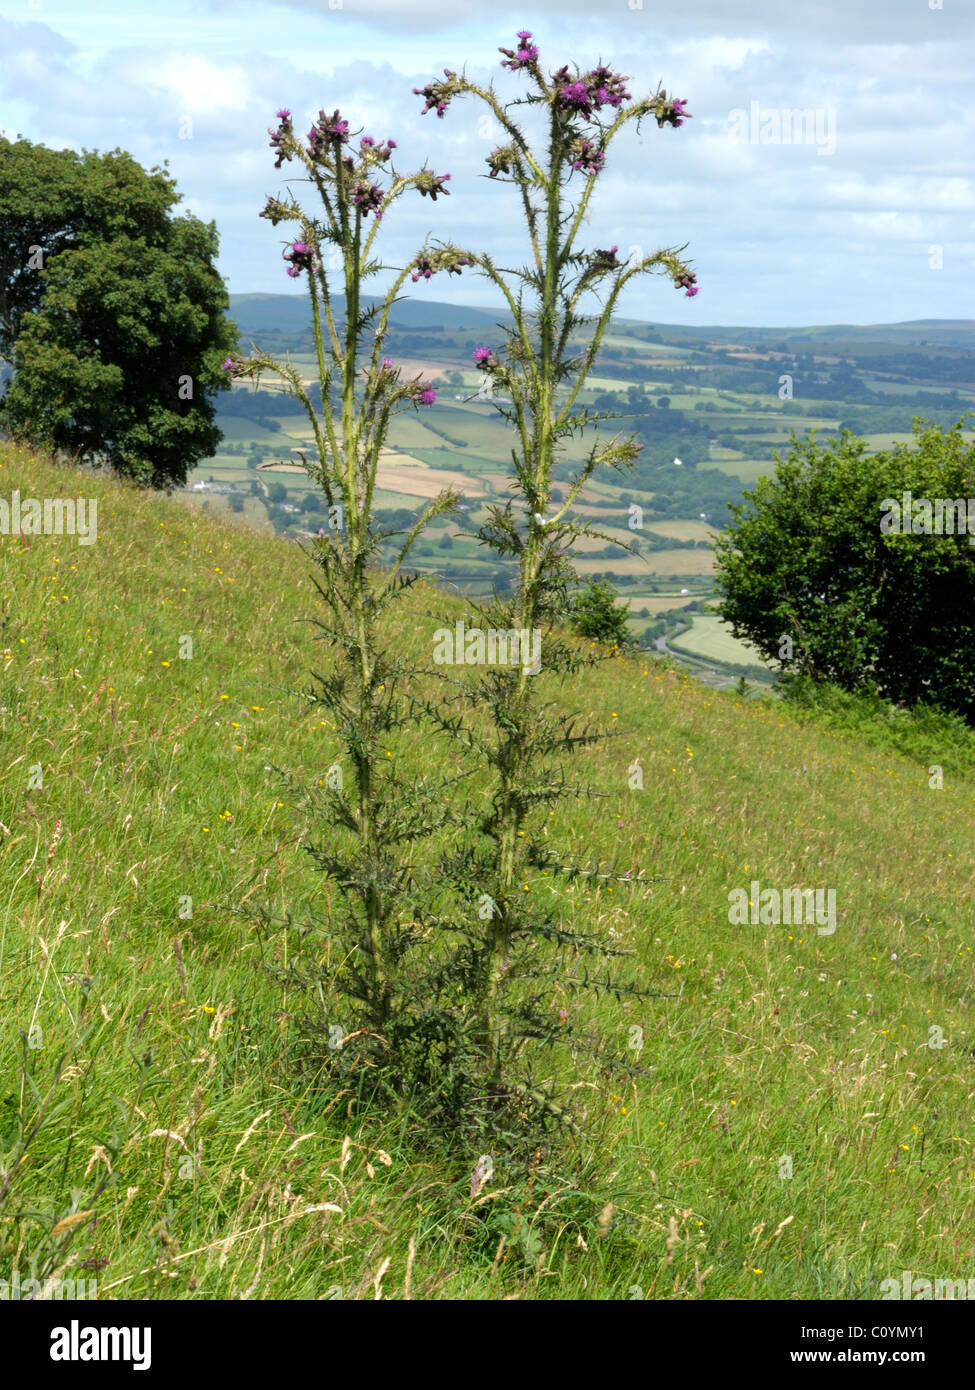 tall thistle plant